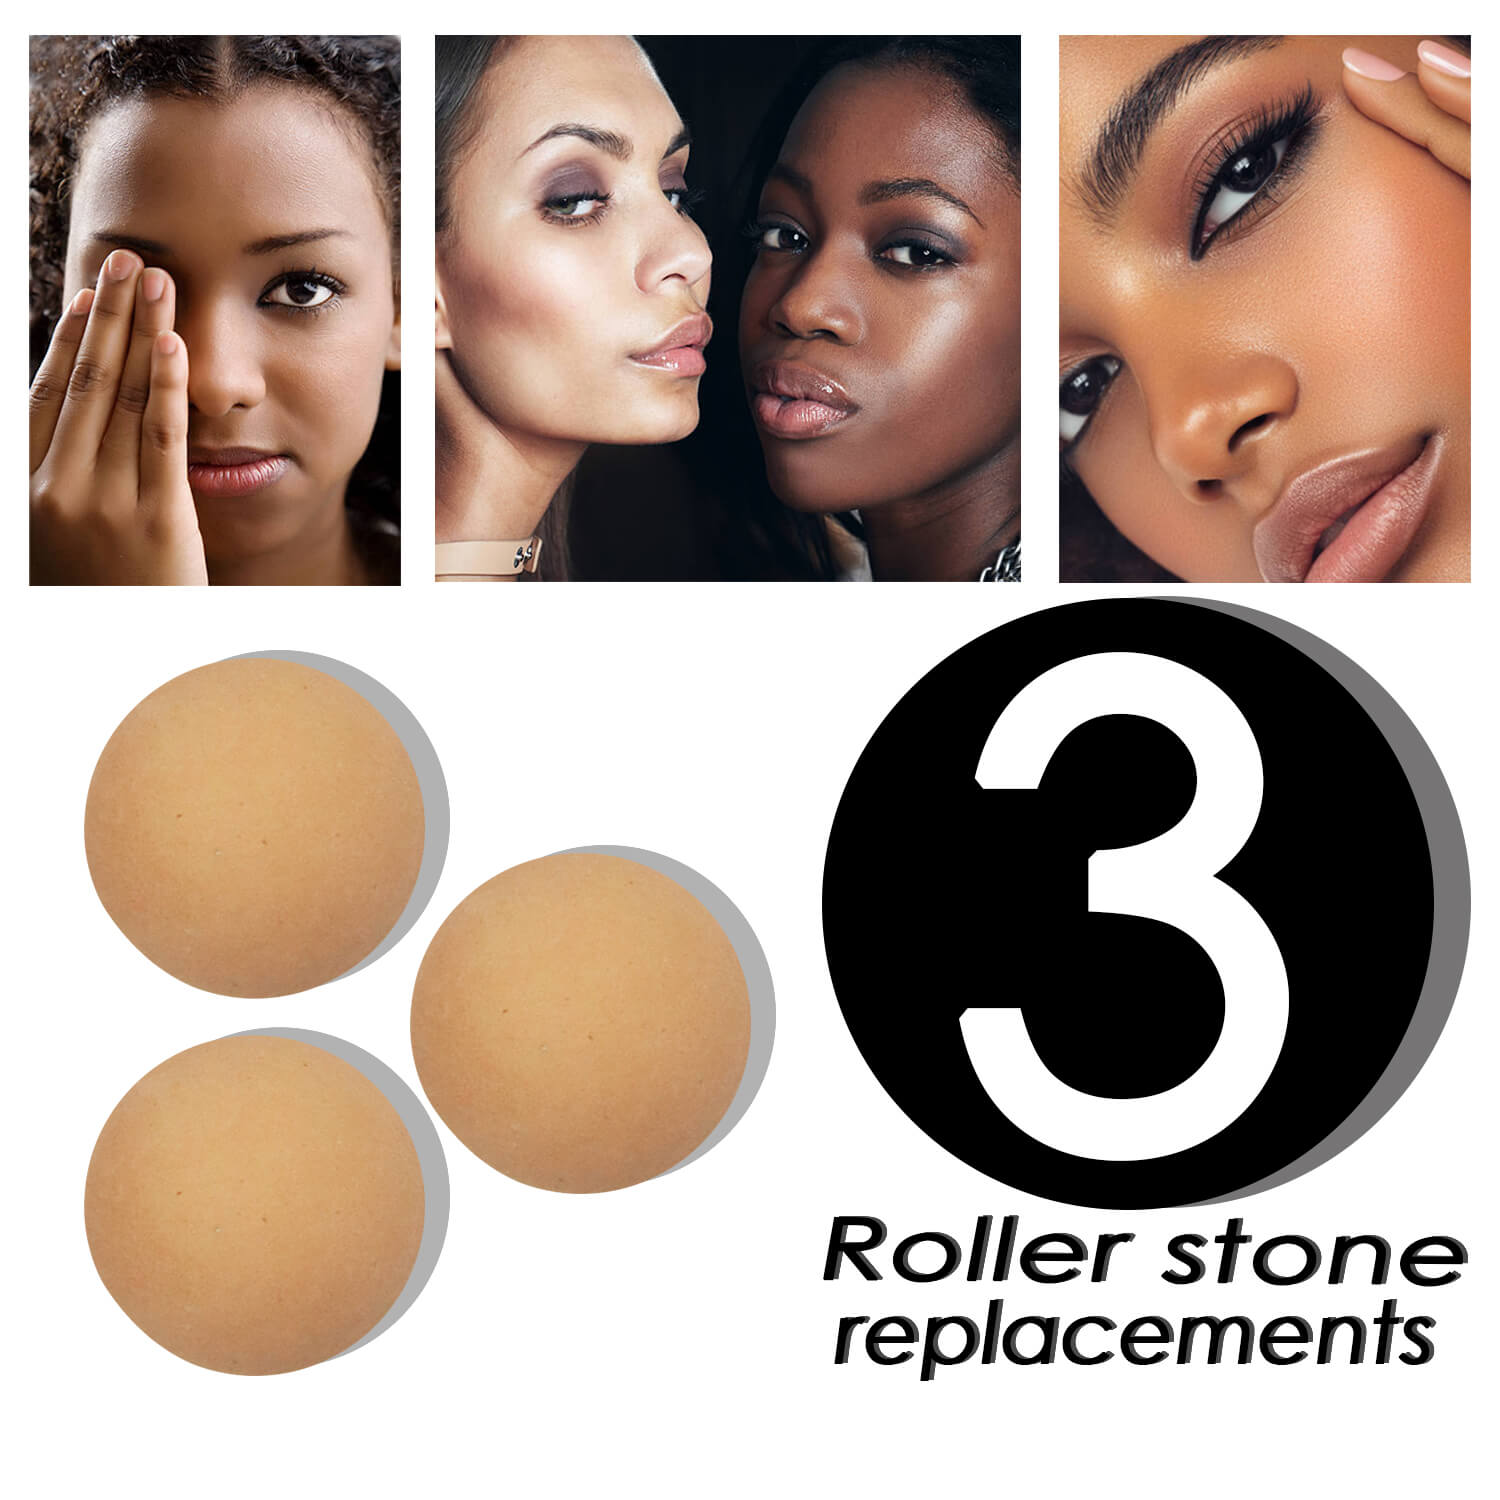 Oil-absorbing Volcanic Roller - Black with 2 Replacement Balls